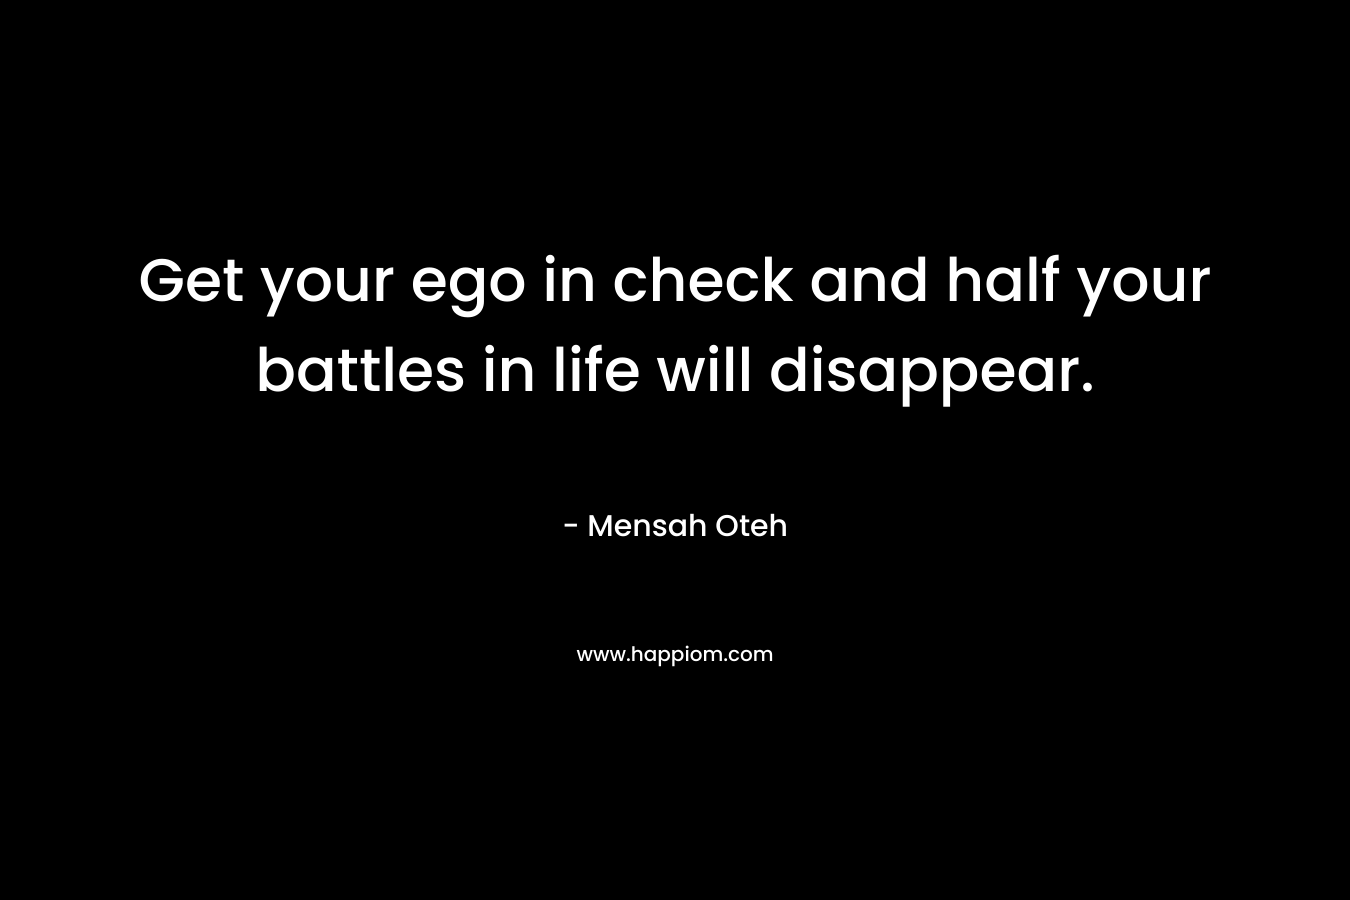 Get your ego in check and half your battles in life will disappear.